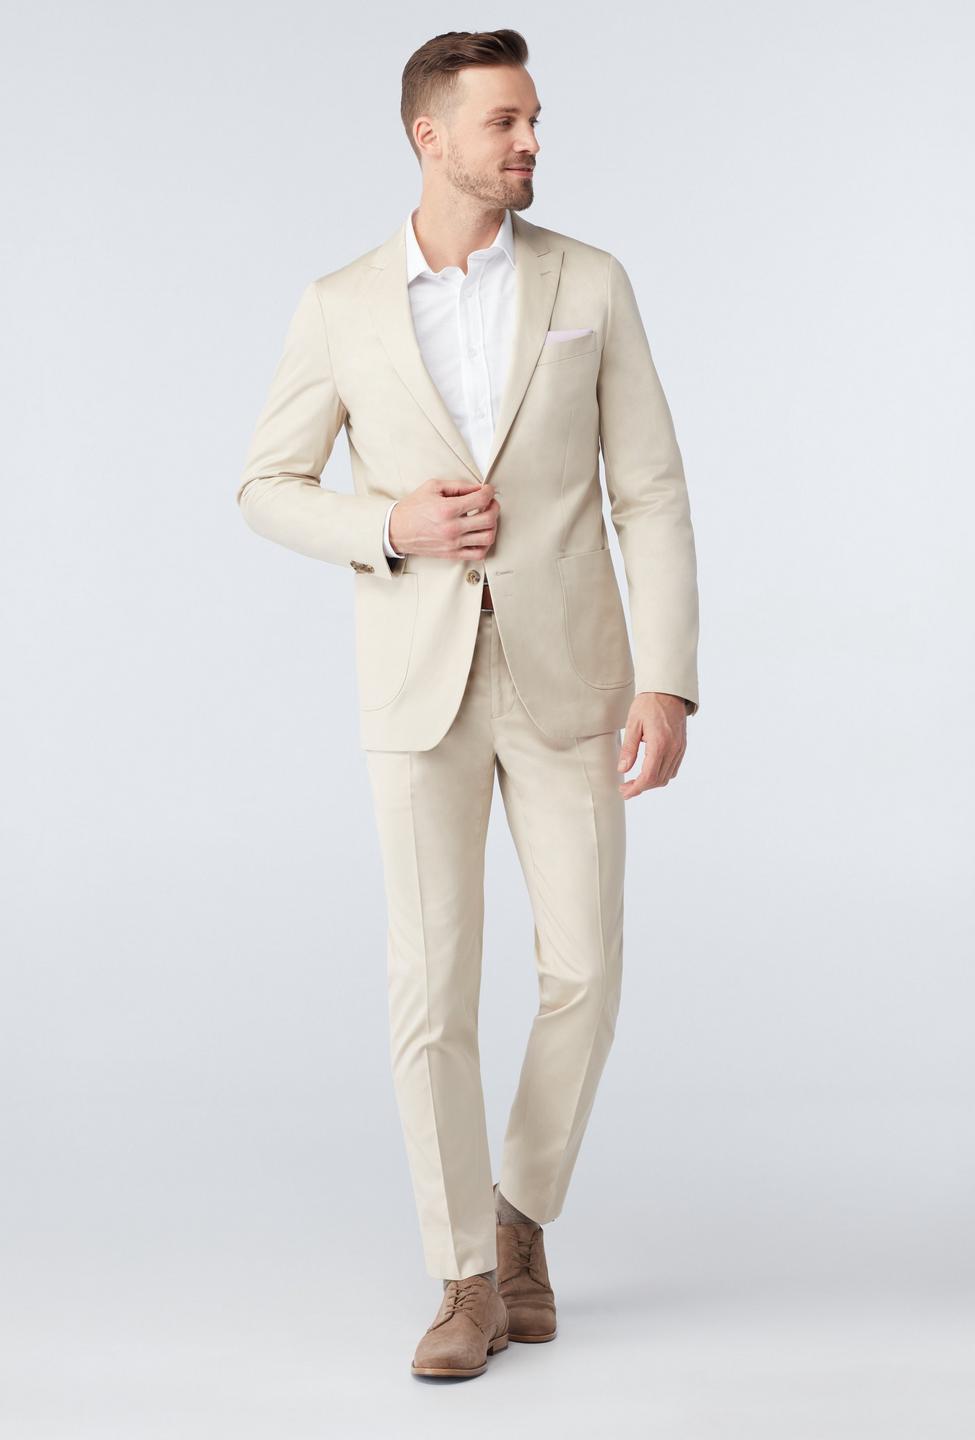 Khaki suit - Hartley Solid Design from Premium Indochino Collection